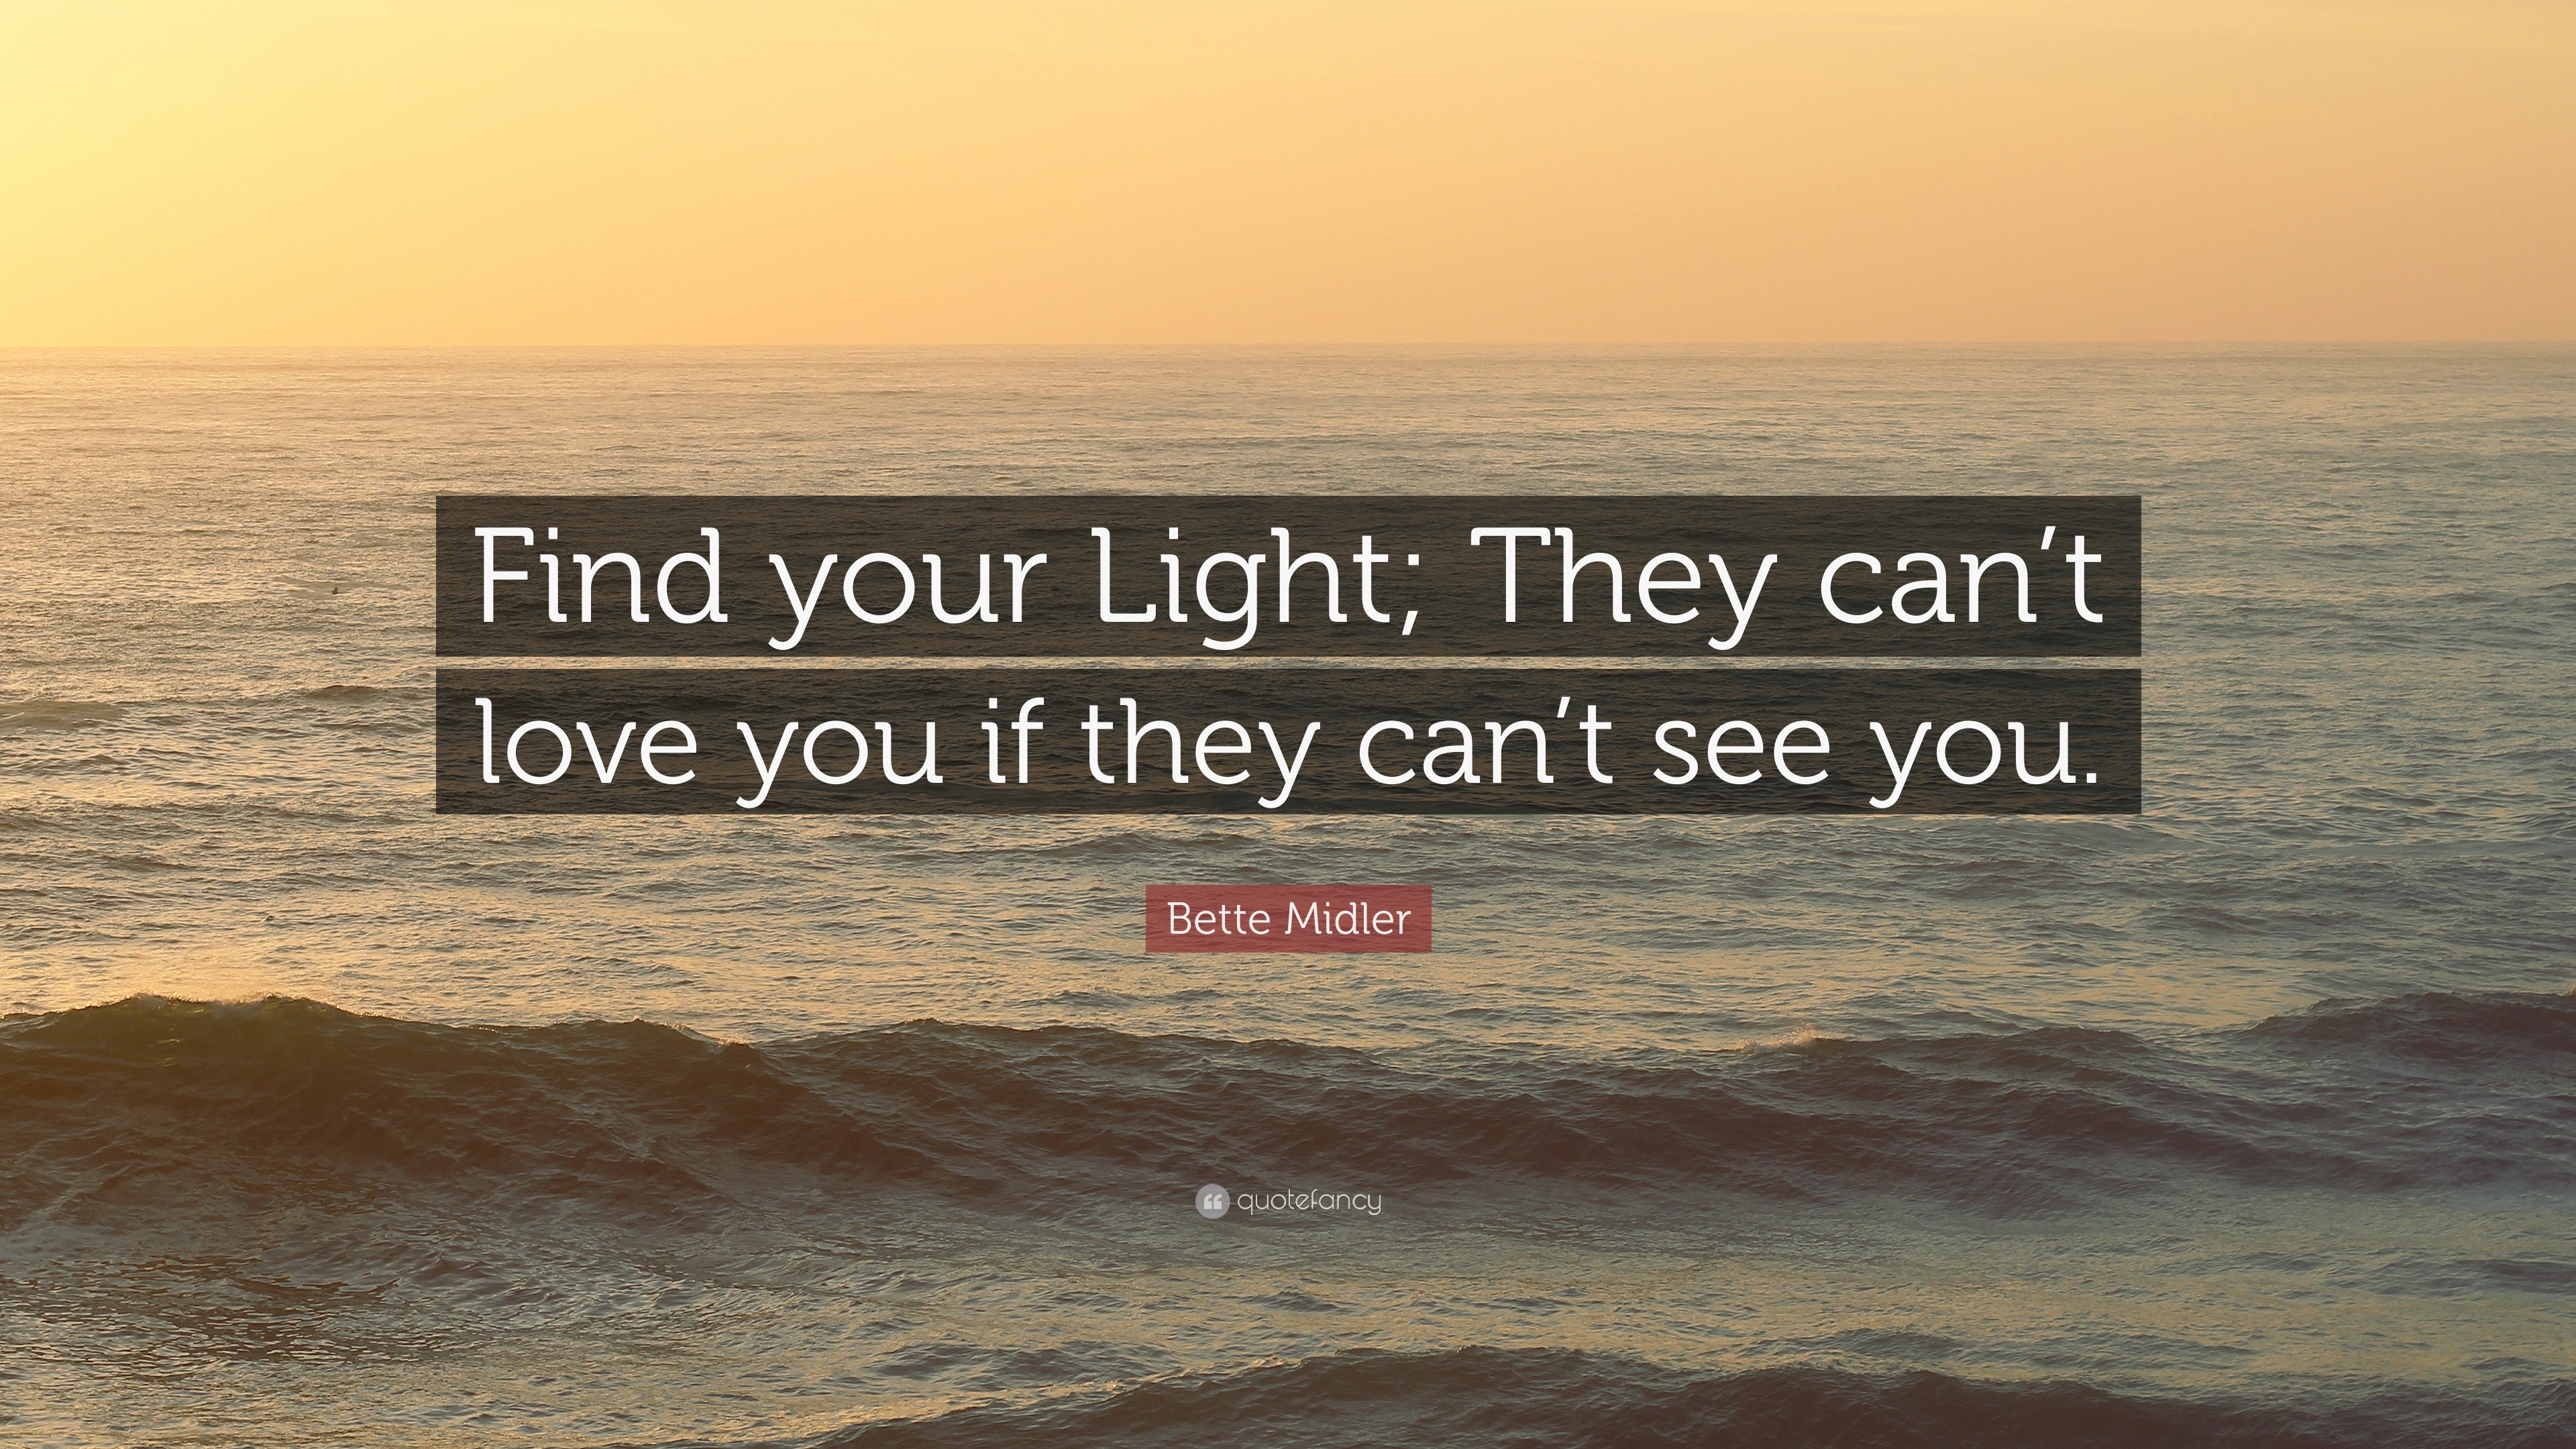 Bette Midler Quote Find Your Light They Can T Love You If They Can T See You 11 Wallpapers Quotefancy